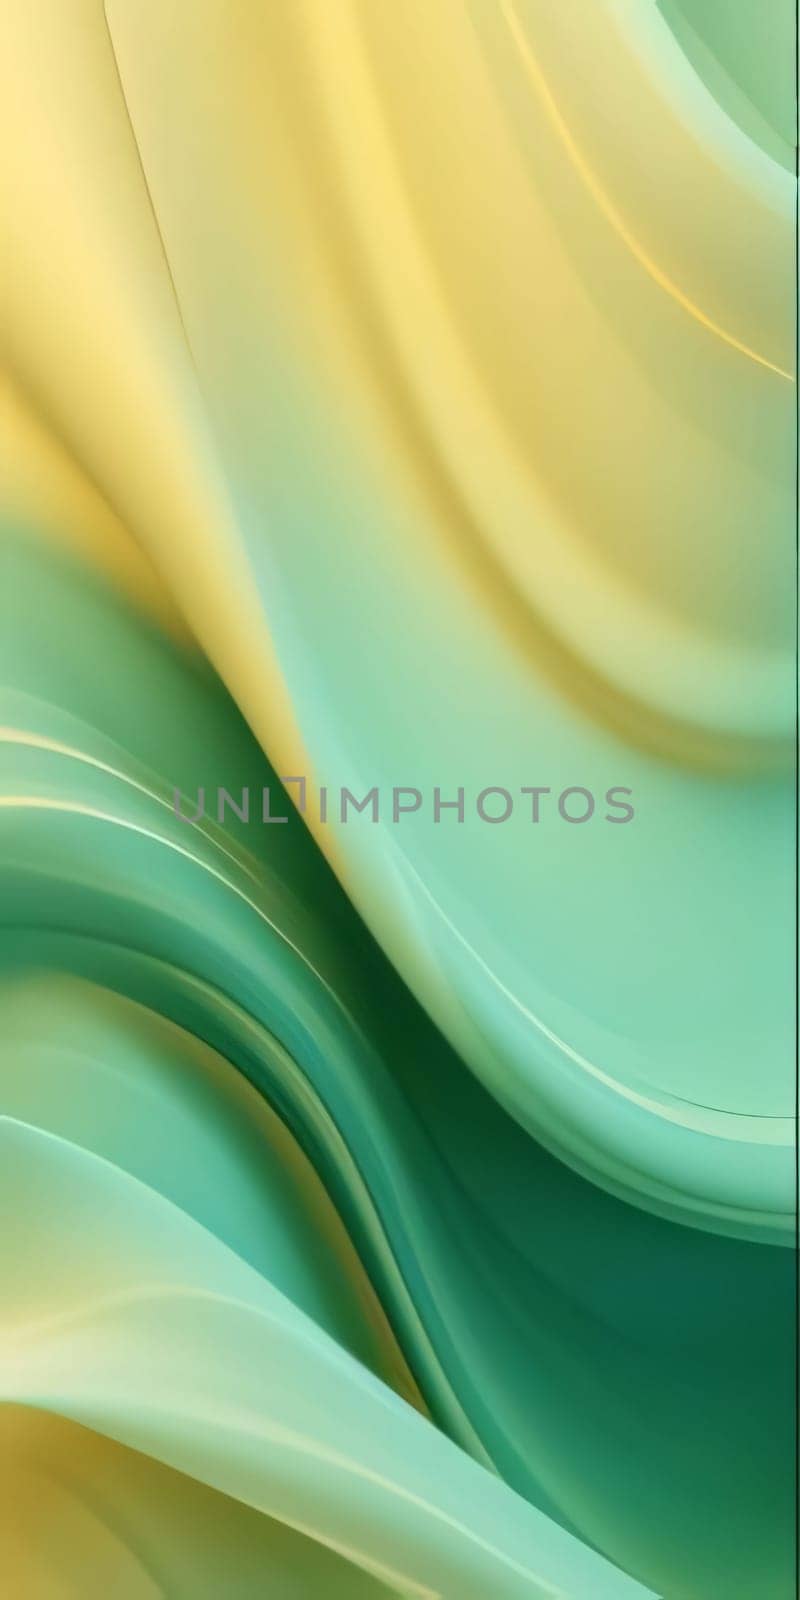 Abstract background design: abstract background with smooth lines in green and yellow colors, computer generated images